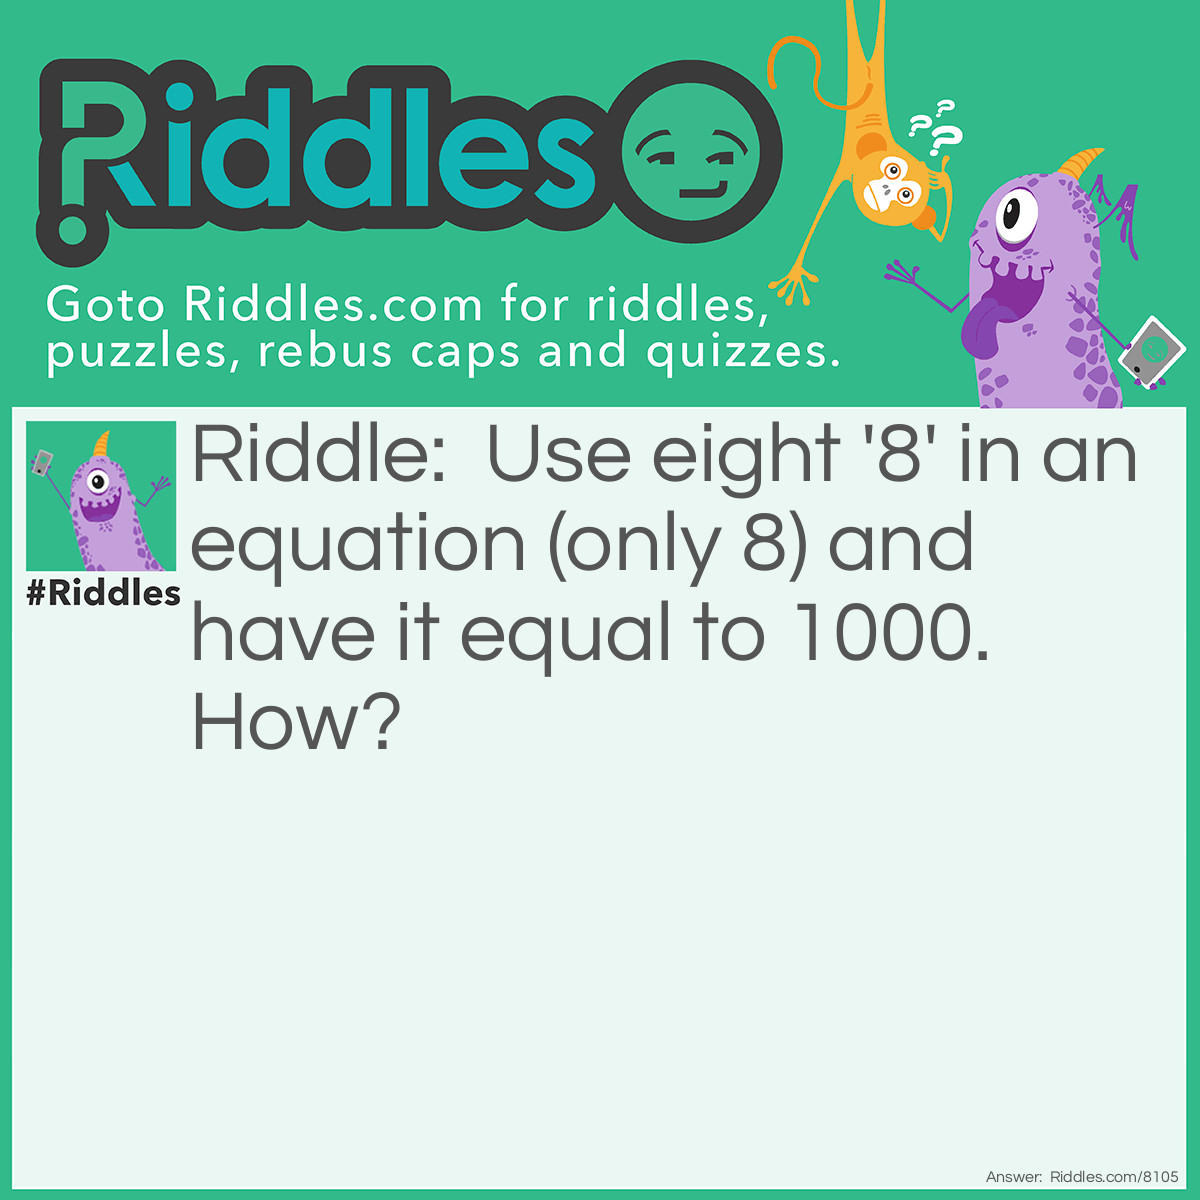 Riddle: Use eight '8' in an equation (only 8) and have it equal to 1000. How? Answer: 8+8+8+88+888=1000